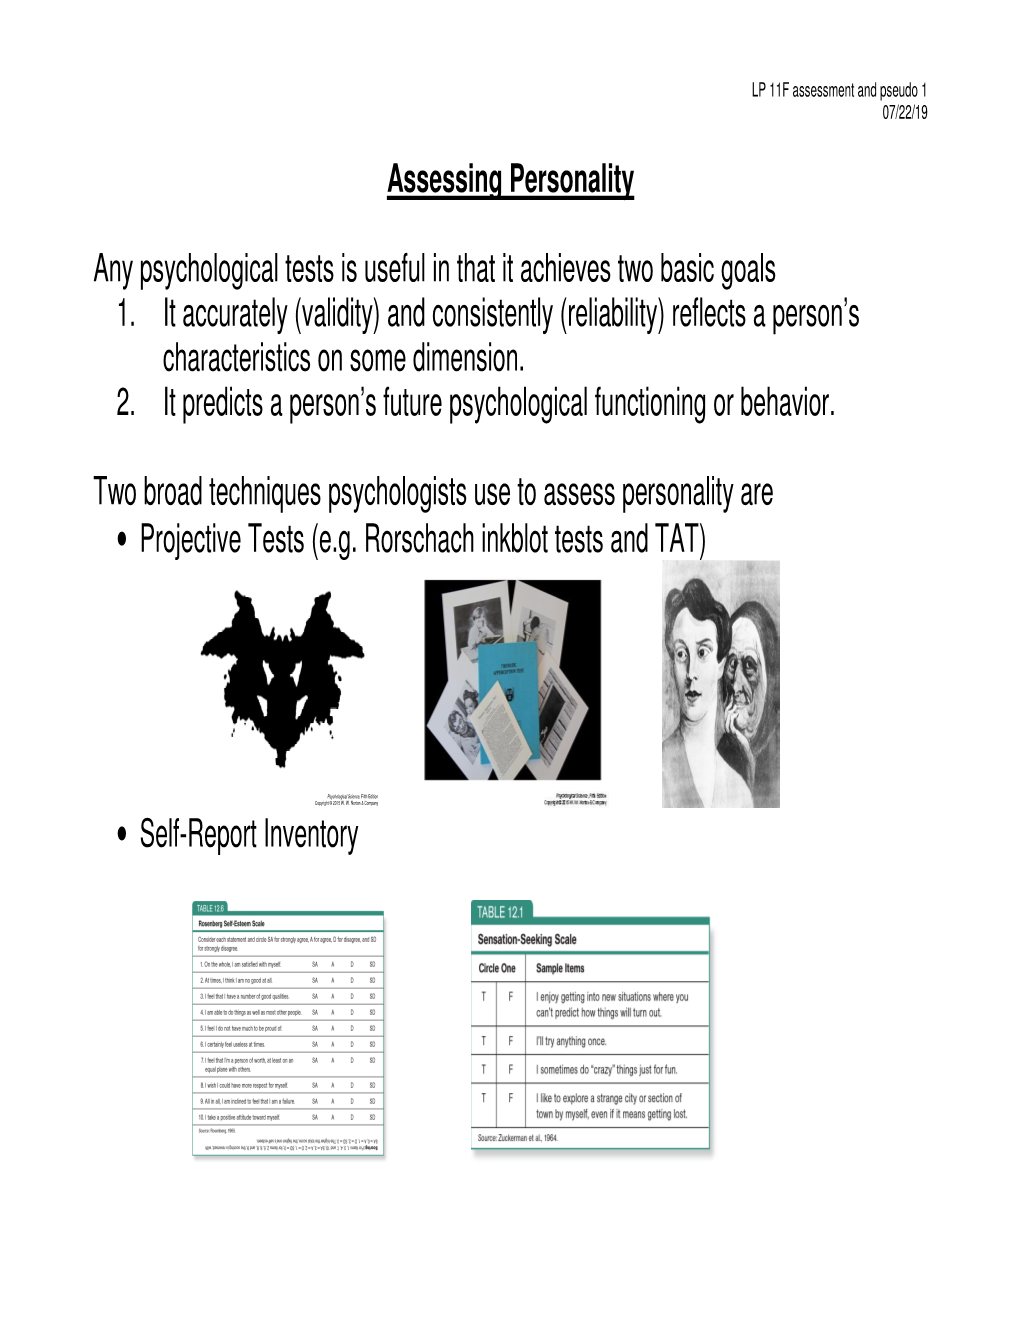 Assessing Personality Any Psychological Tests Is Useful in That It Achieves Two Basic Goals 1. It Accurately (Validity) and Cons